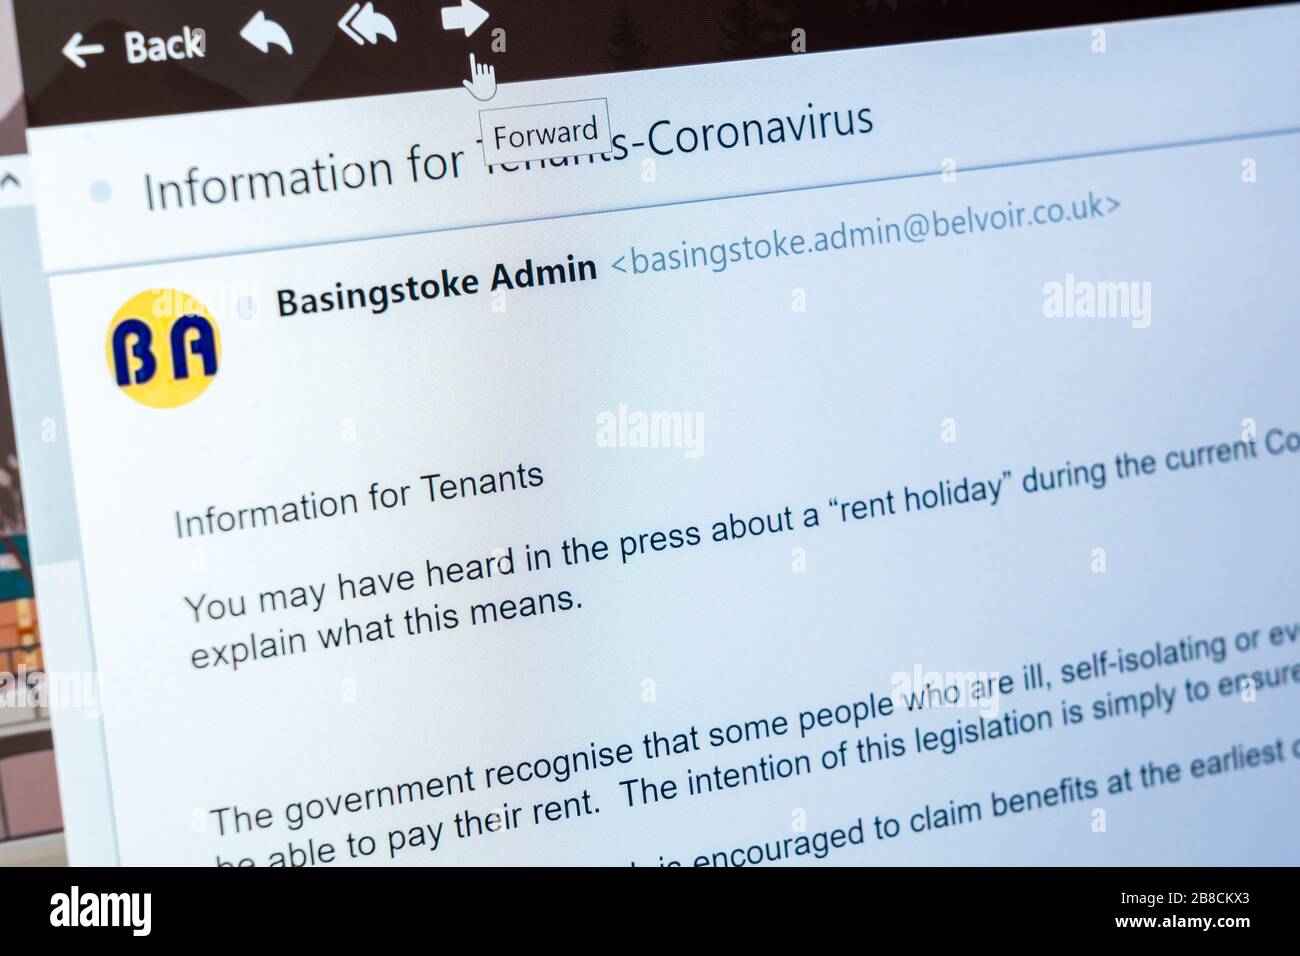 An email from a letting agency to tenants discussing Coronavirus Covid 19 and a rent holiday, Basingstoke, England Stock Photo